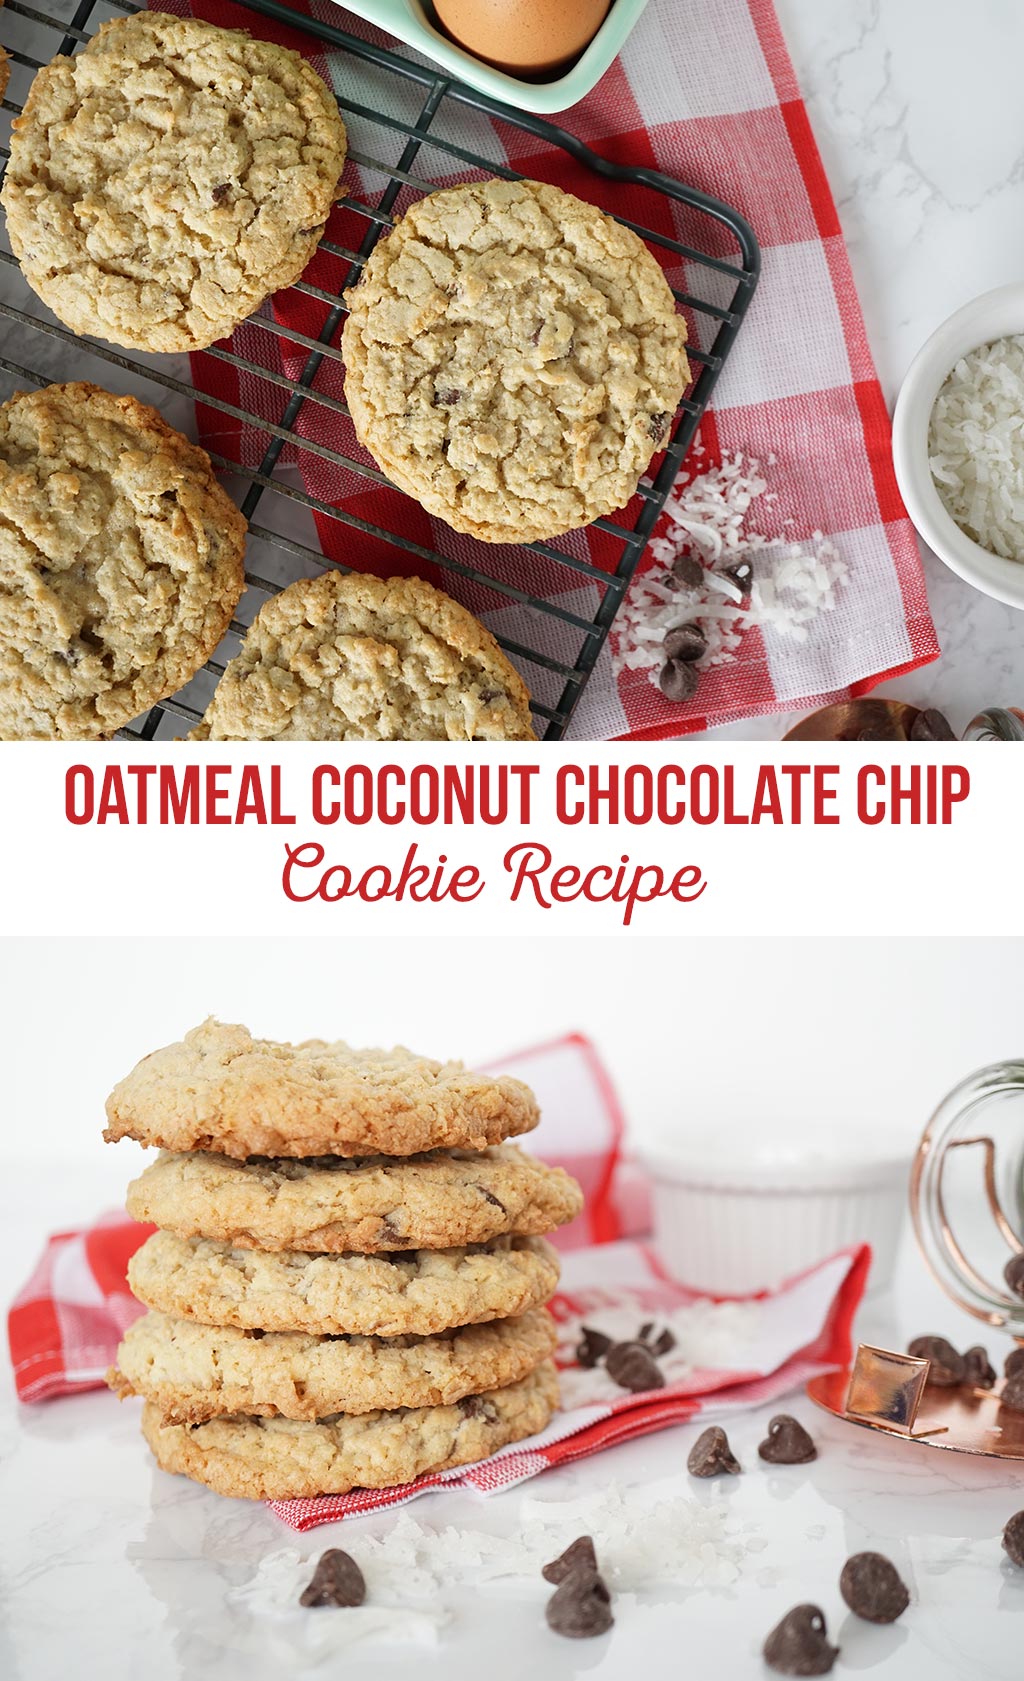 oatmeal coconut chocolate chip cookies on a cooling rack with a white background and a red and white checkered kitchen towel.